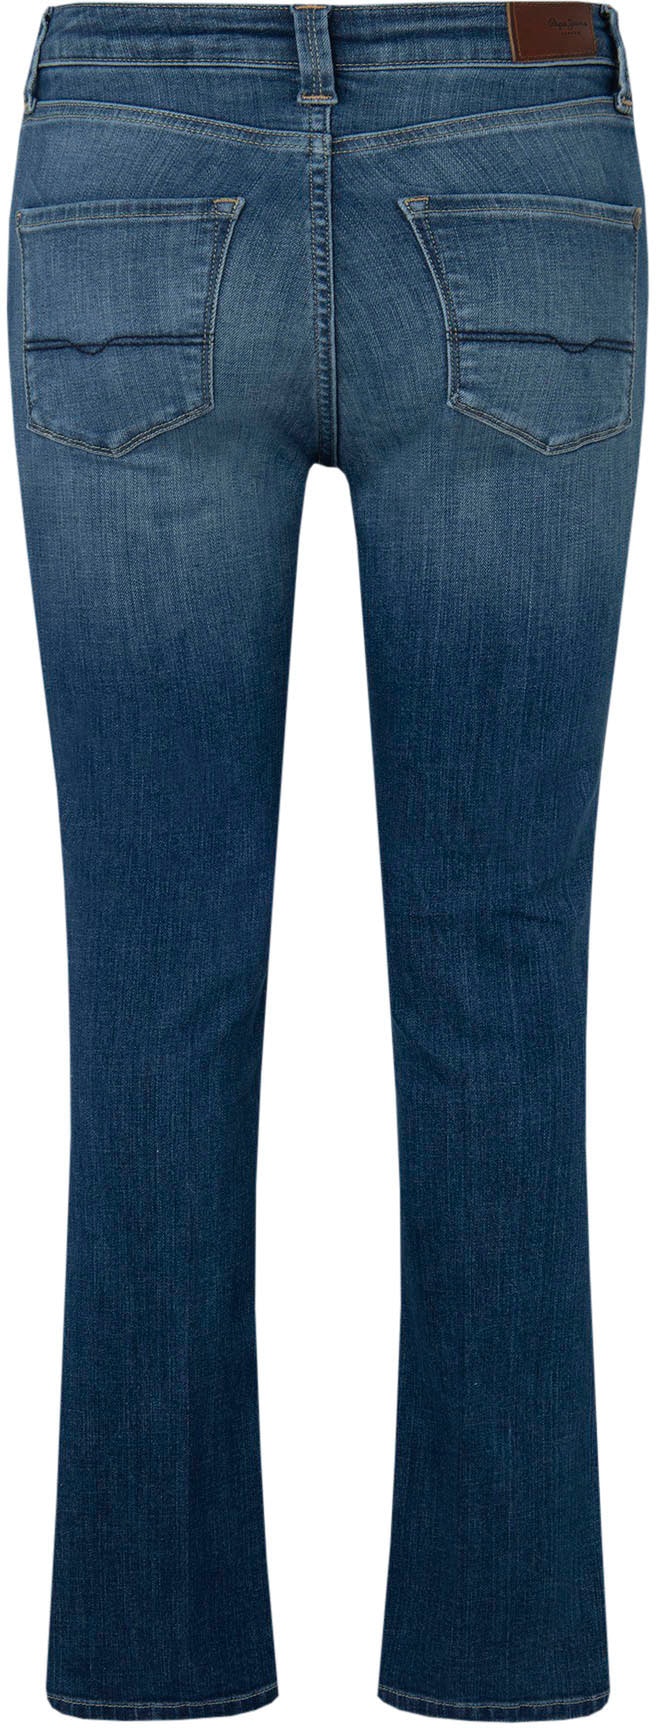 Pepe Jeans Bootcut-Jeans »Dion Flare« kaufen online